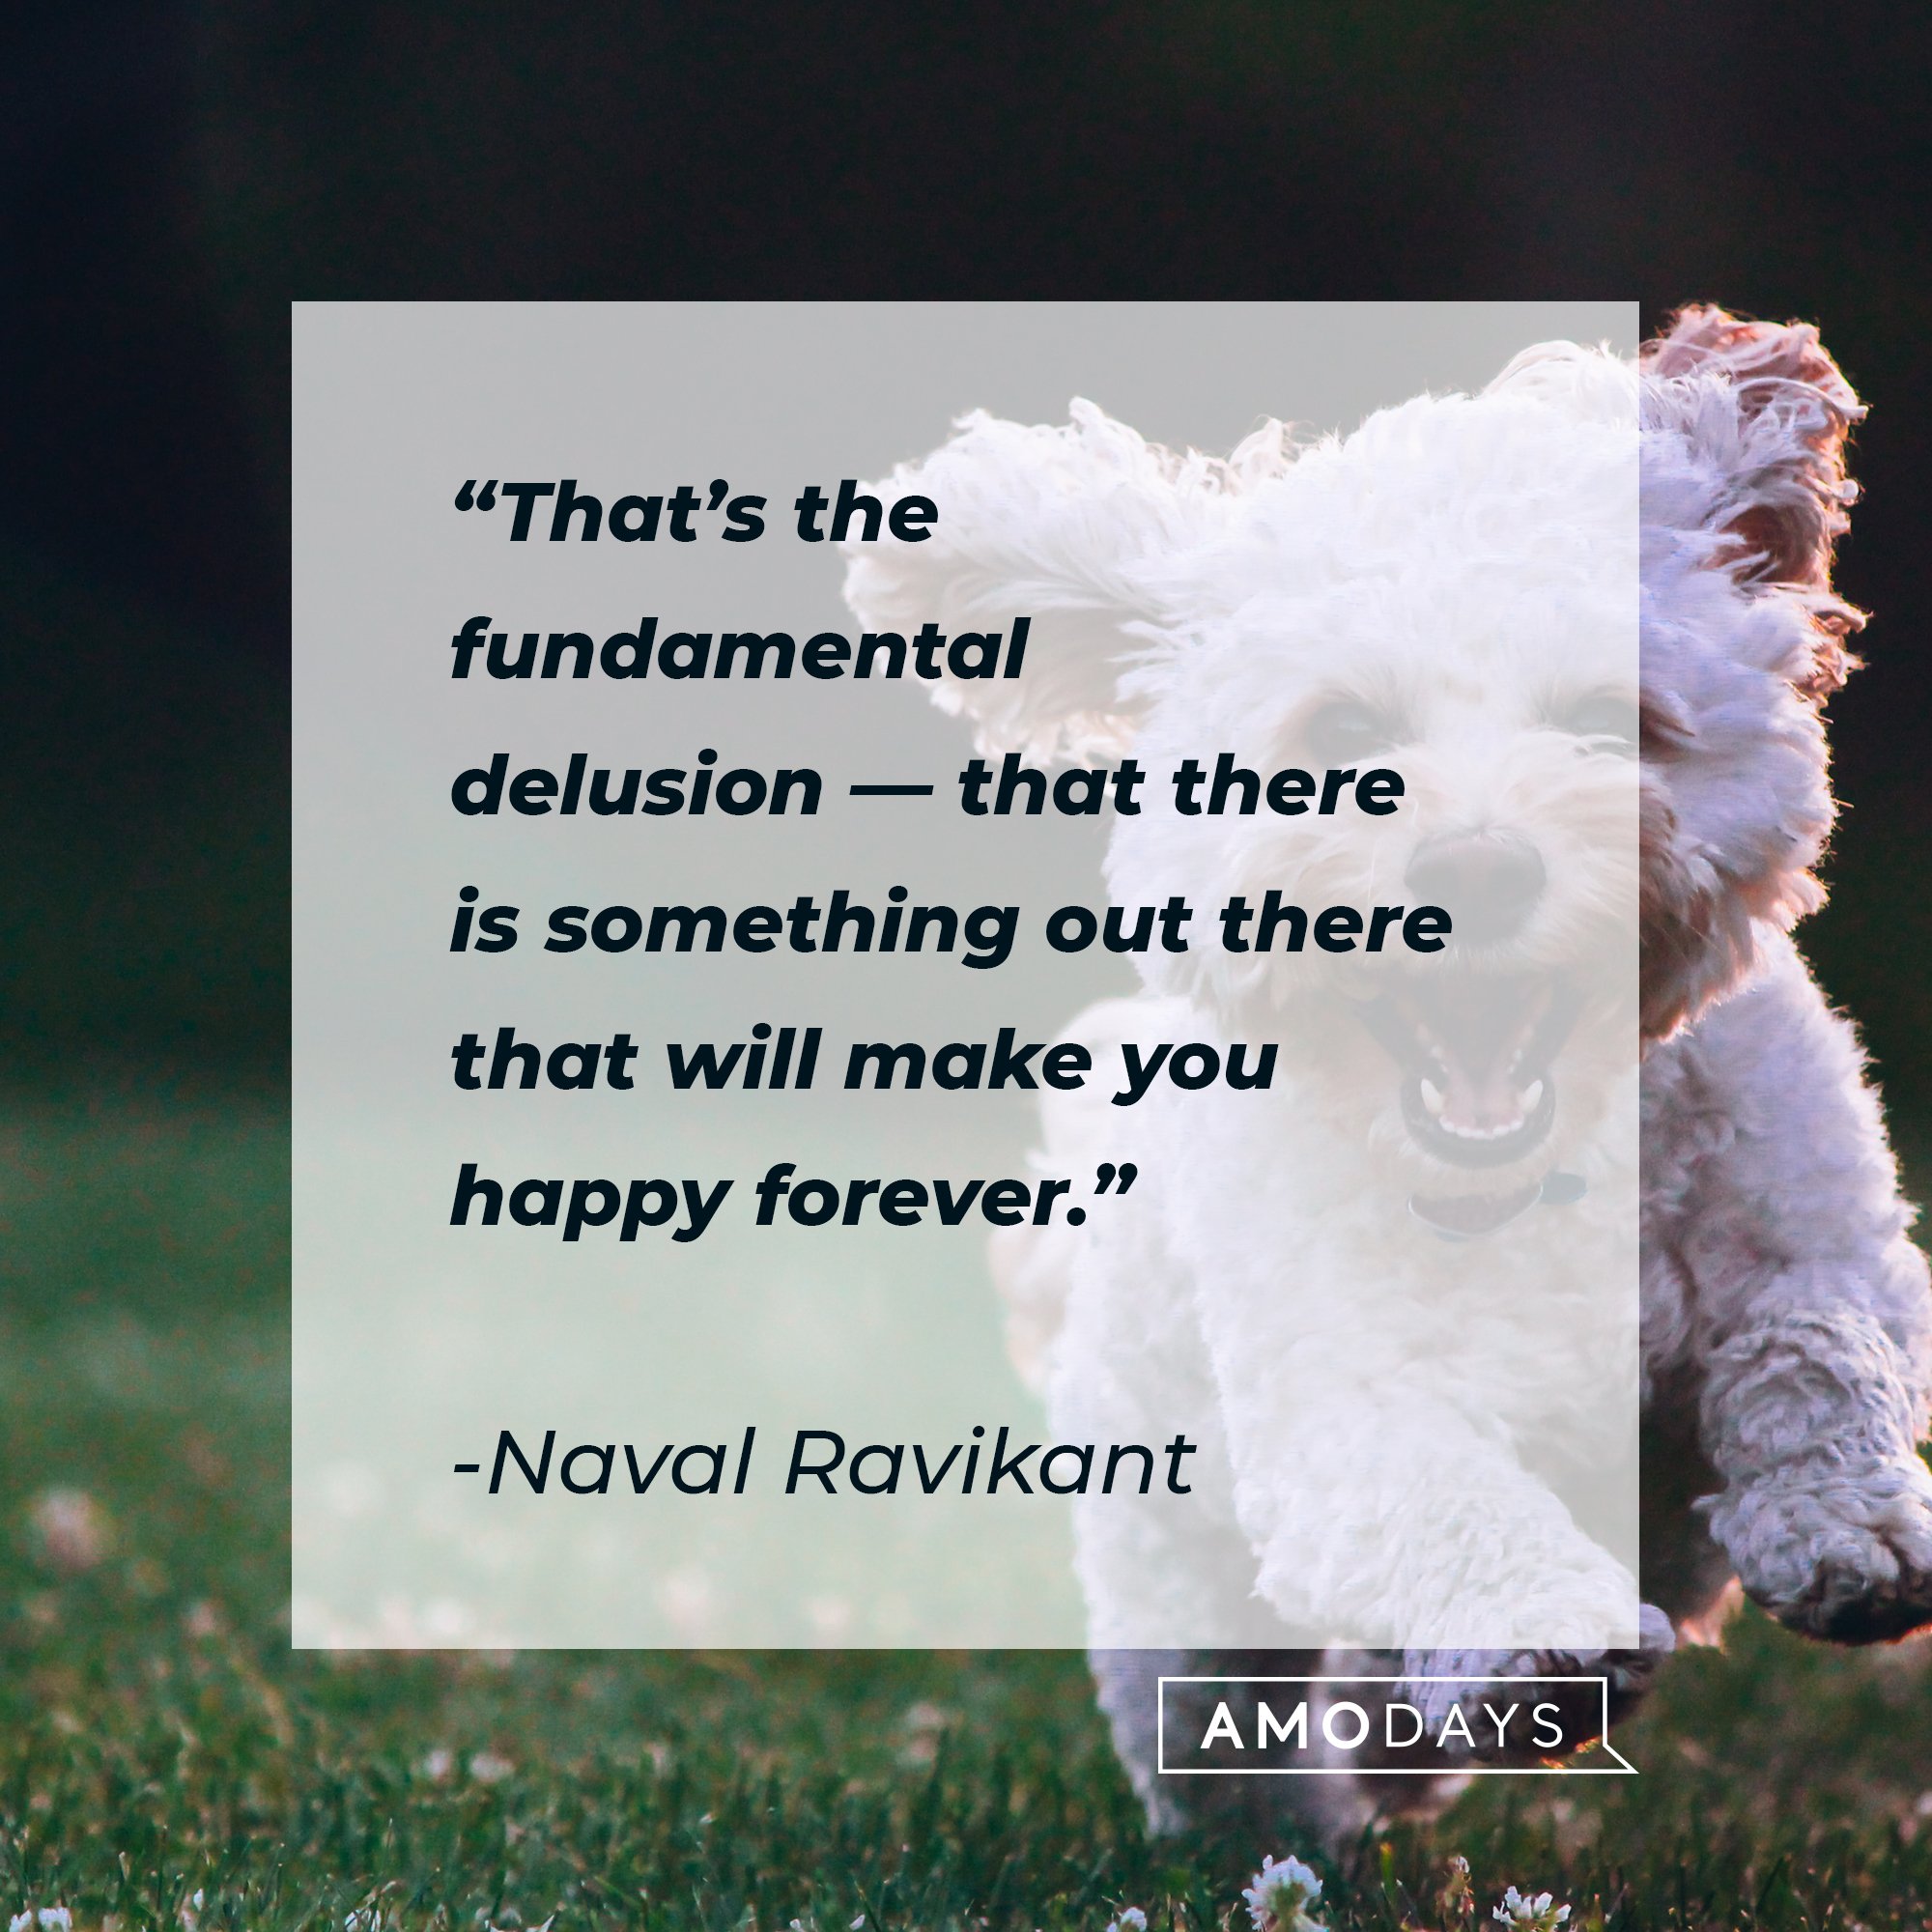 Naval Ravikant's quote: That’s the fundamental delusion — that there is something out there that will make you happy forever. | Image: AmoDays 